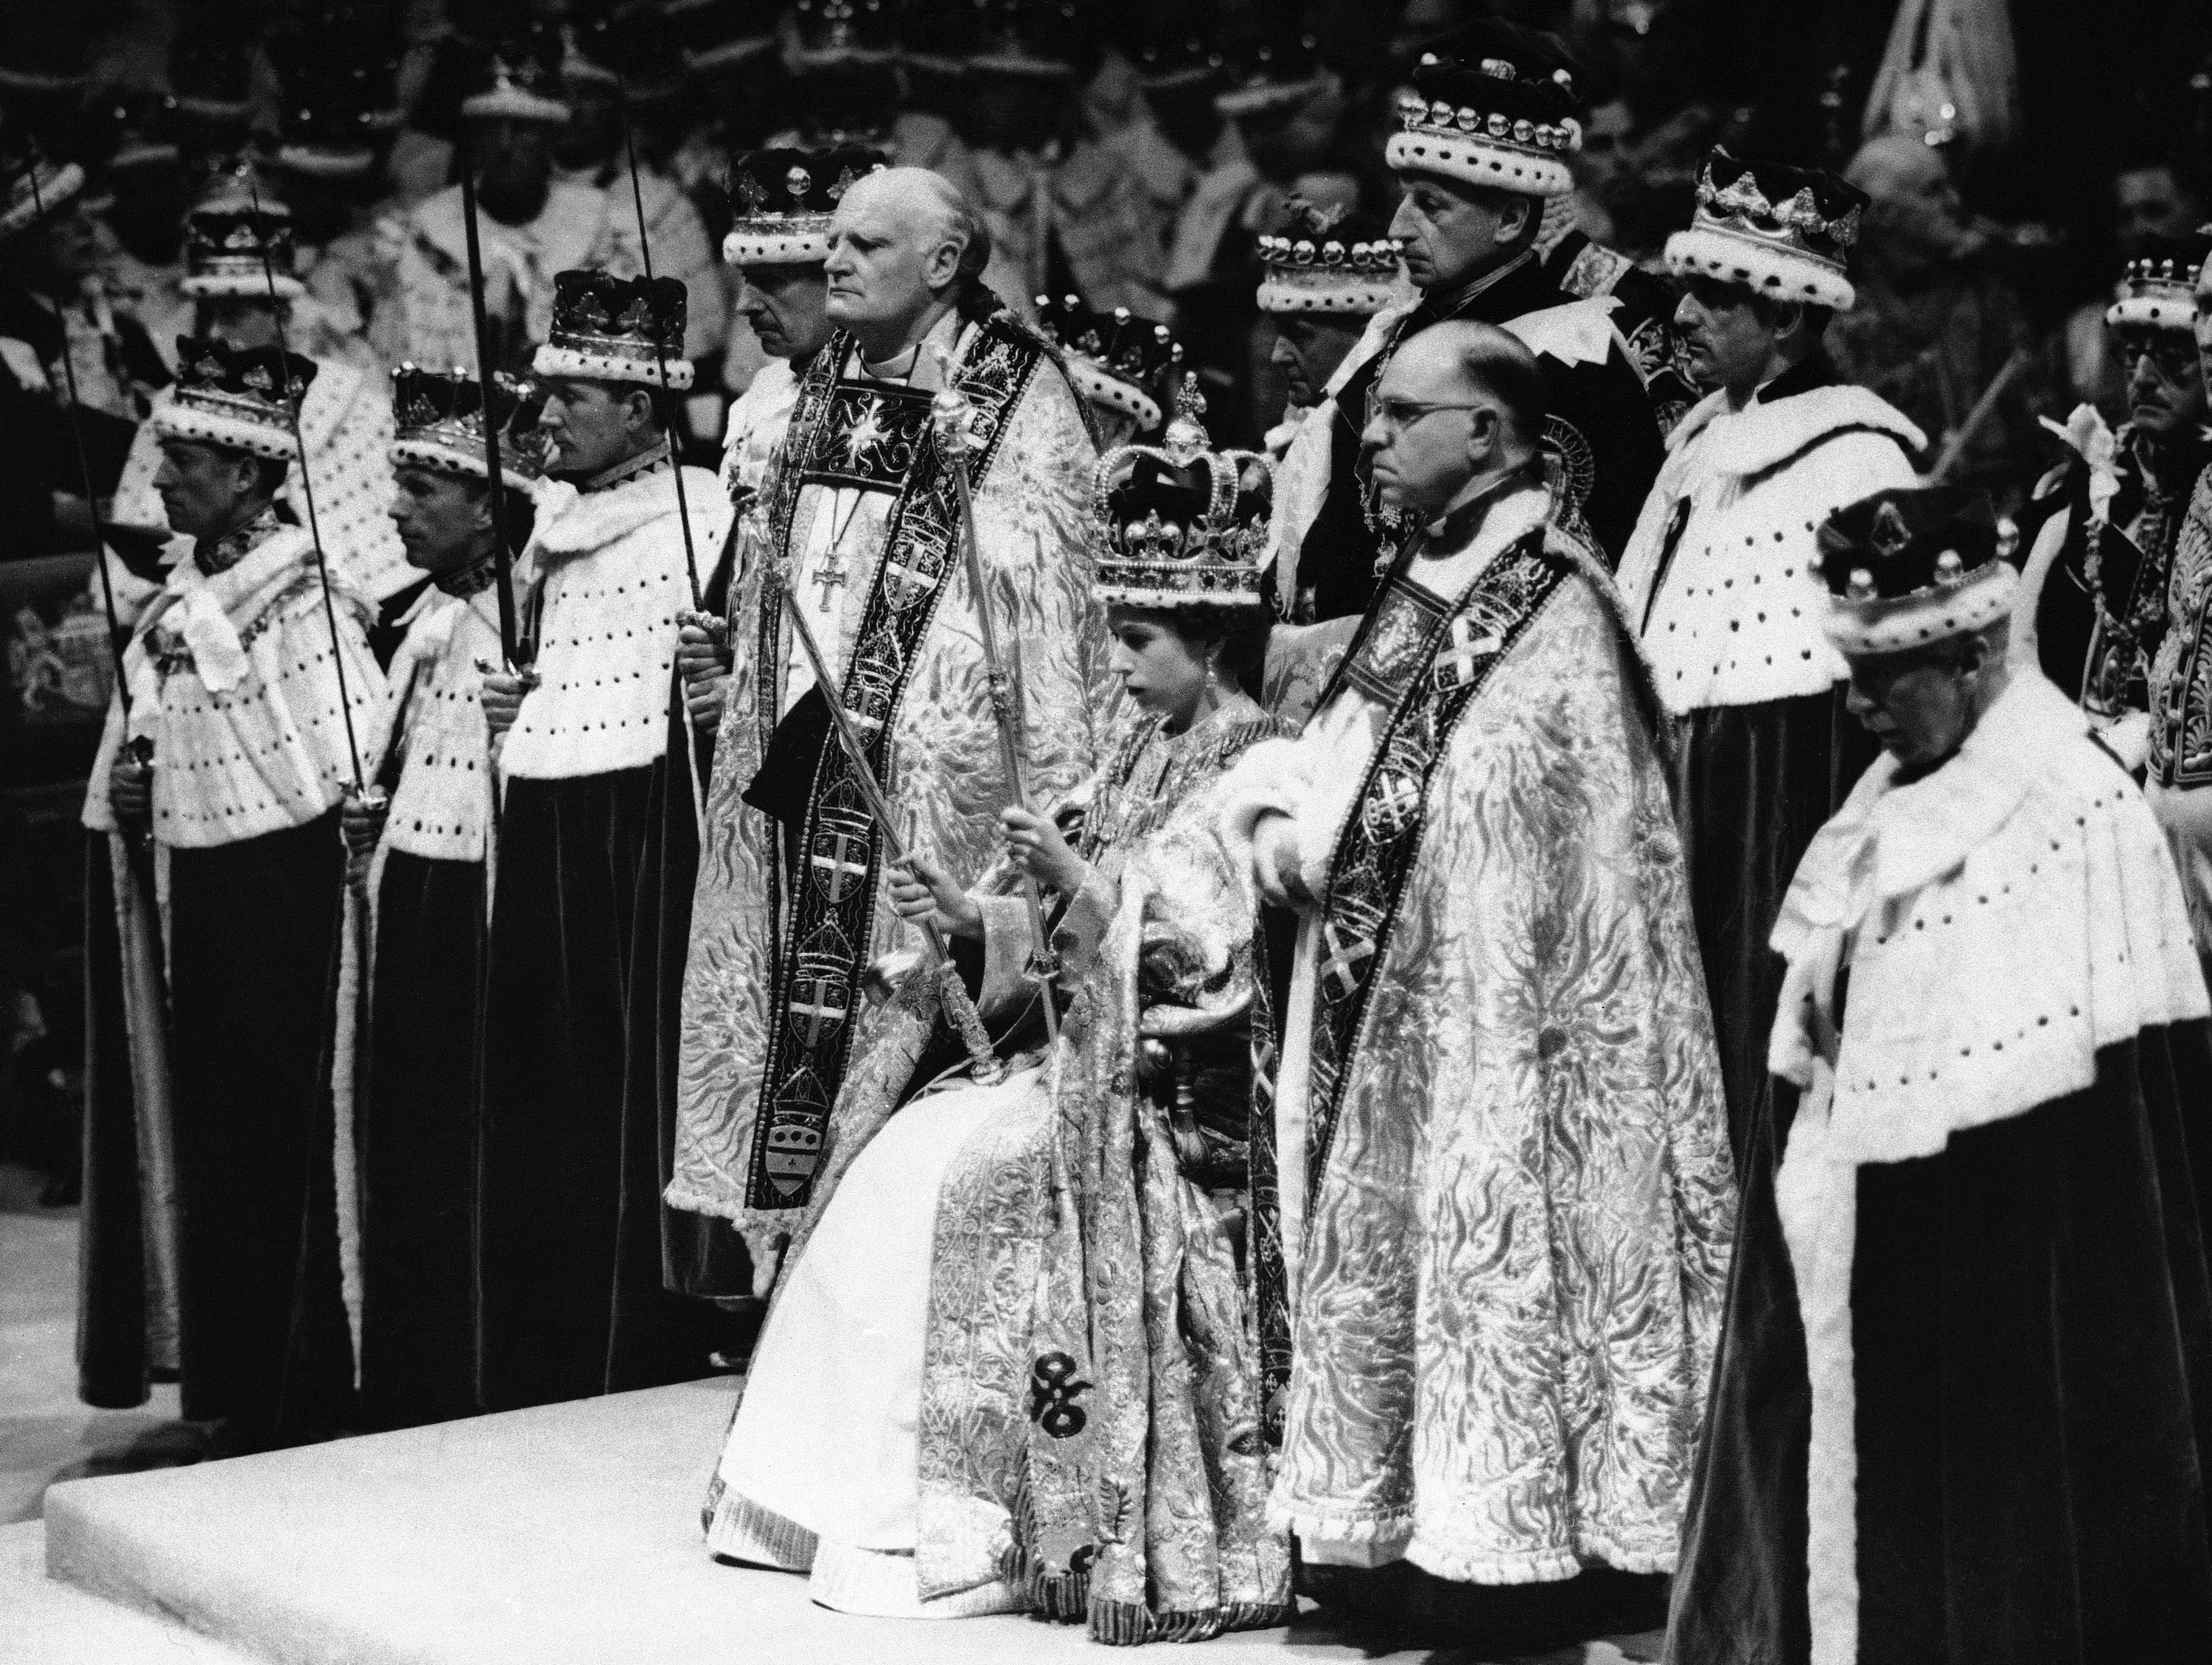 The event is likely to differ significantly from the Queen’s coronation in June 1953